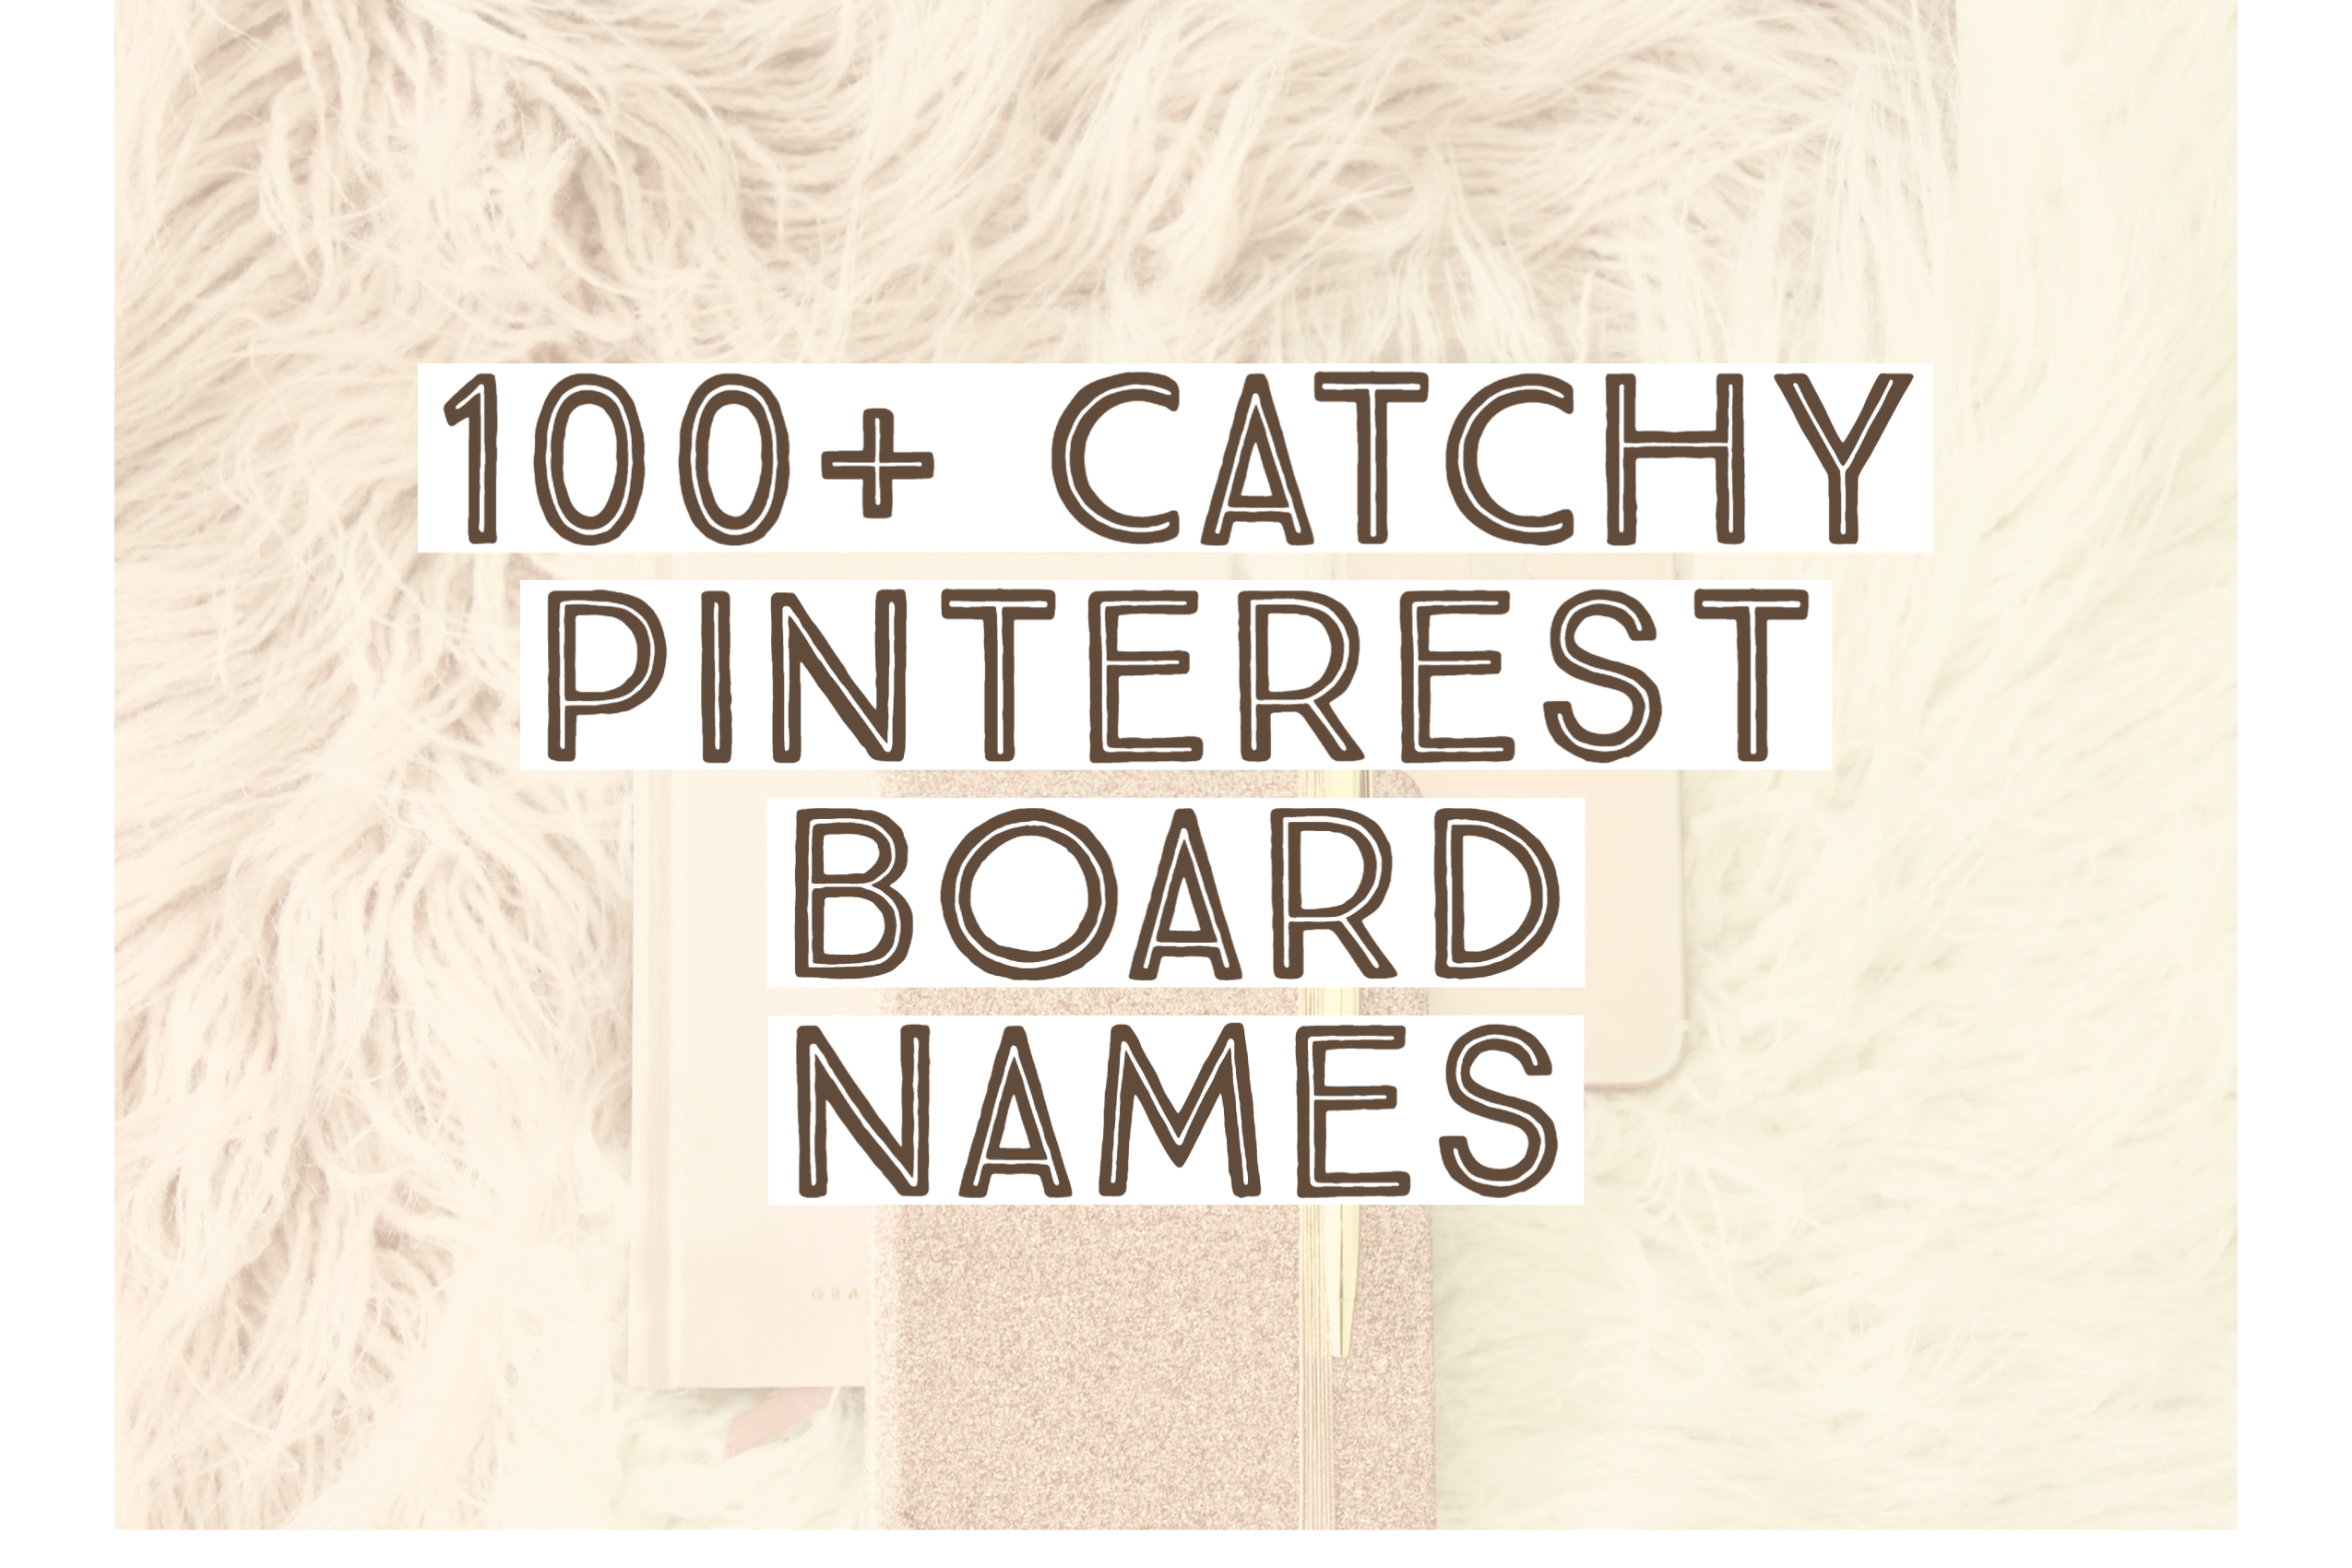 100+ Catchy Pinterest Board Names